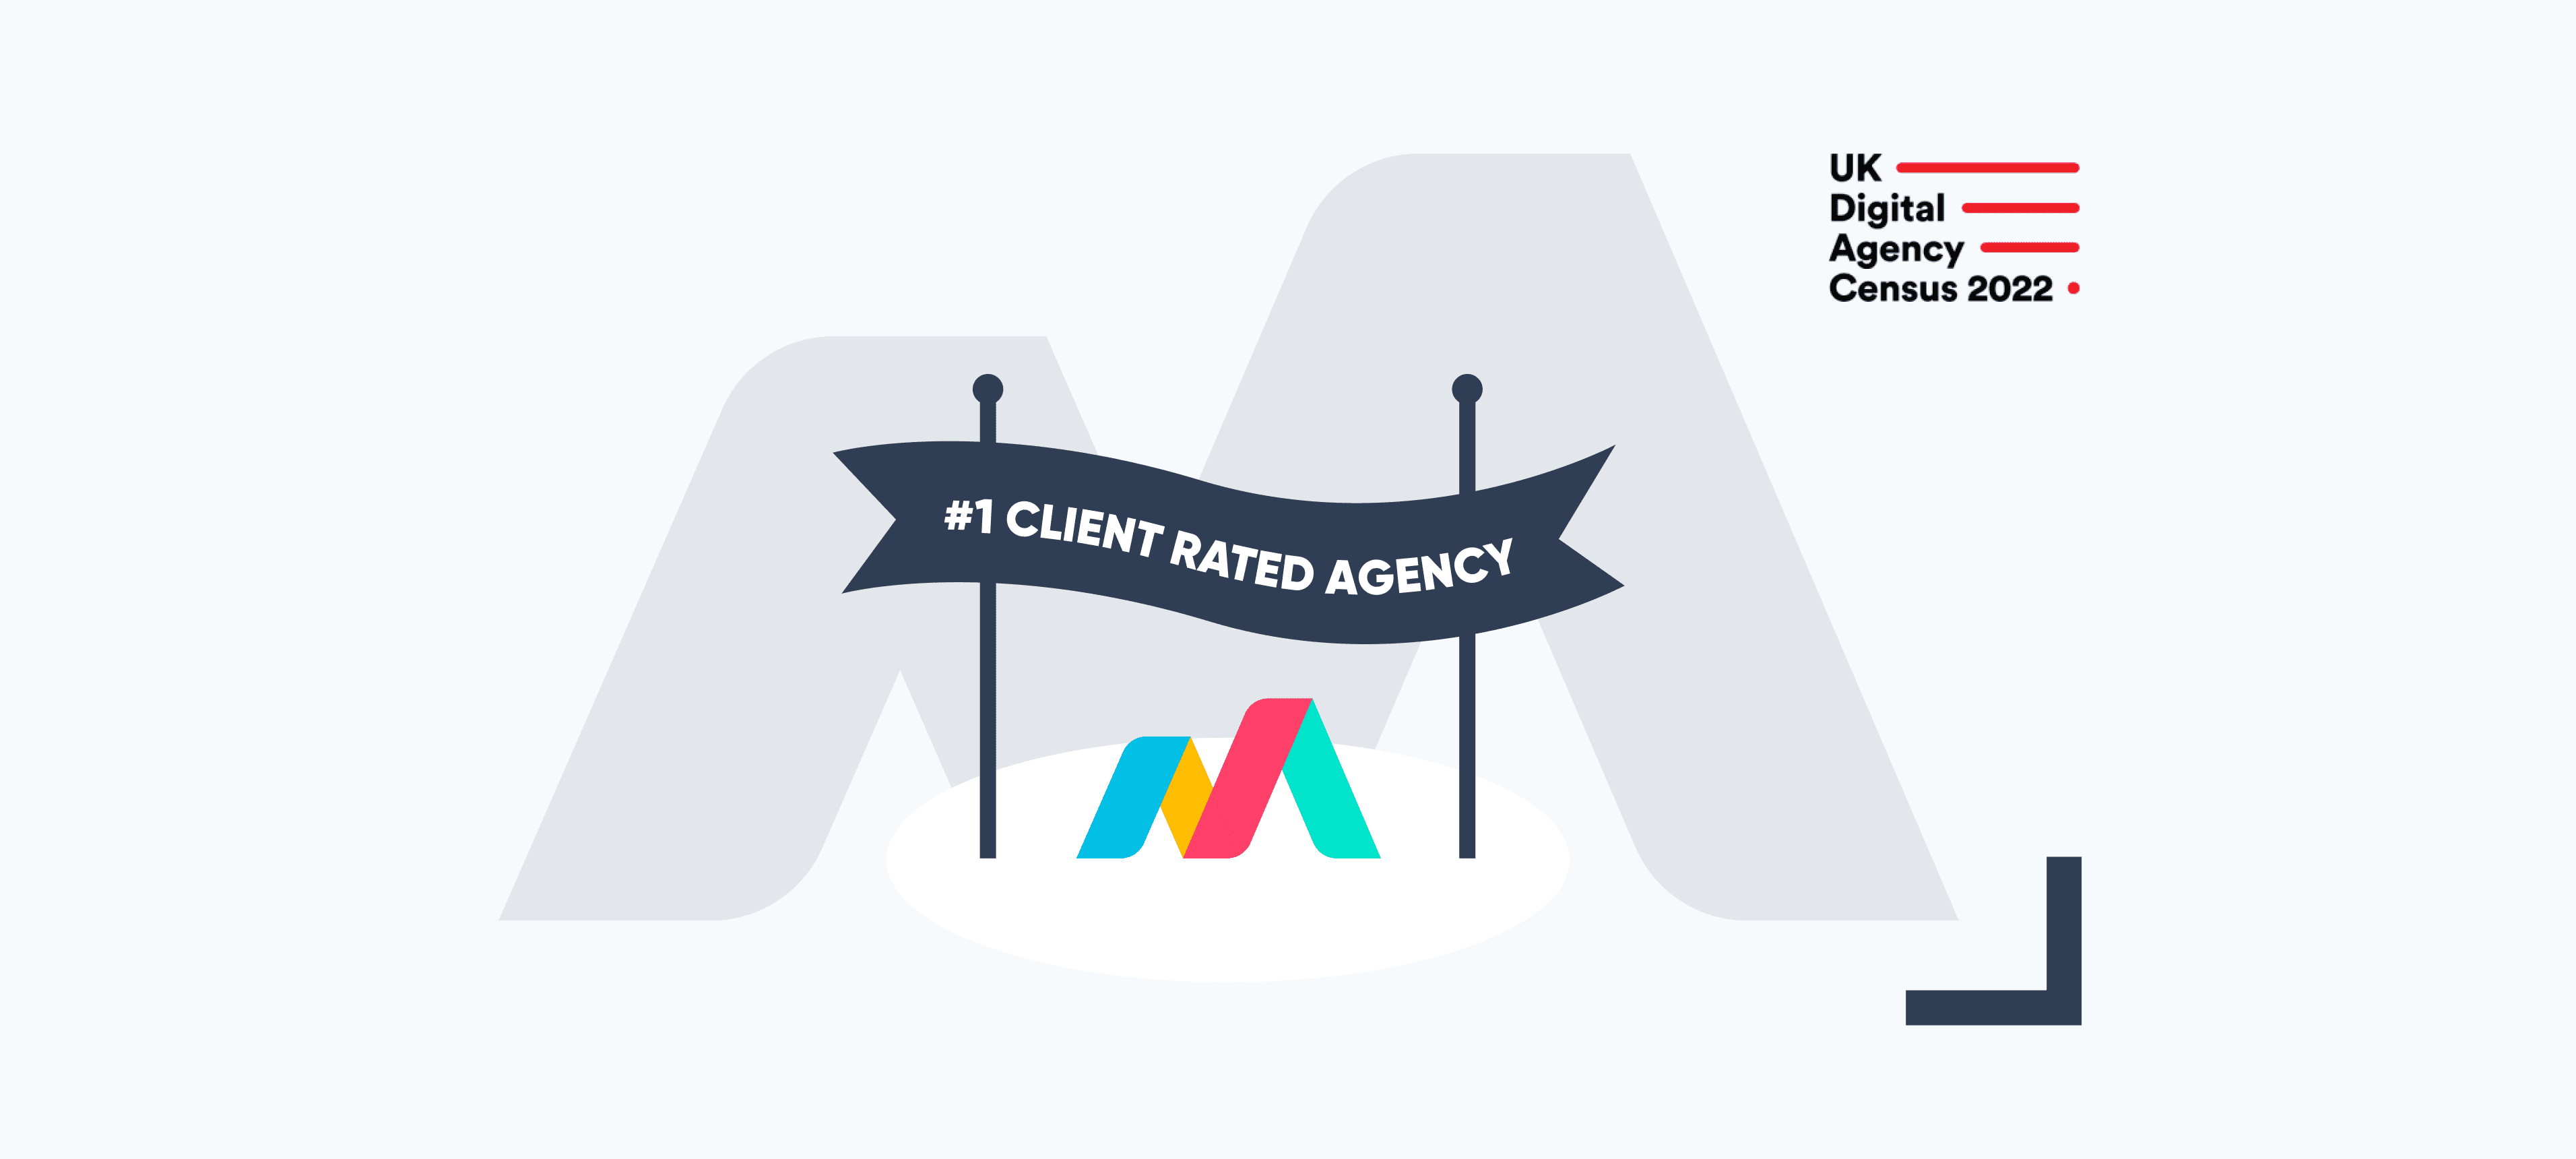 We’re the UK’s #1 Agency, According to Our Clients!🎖